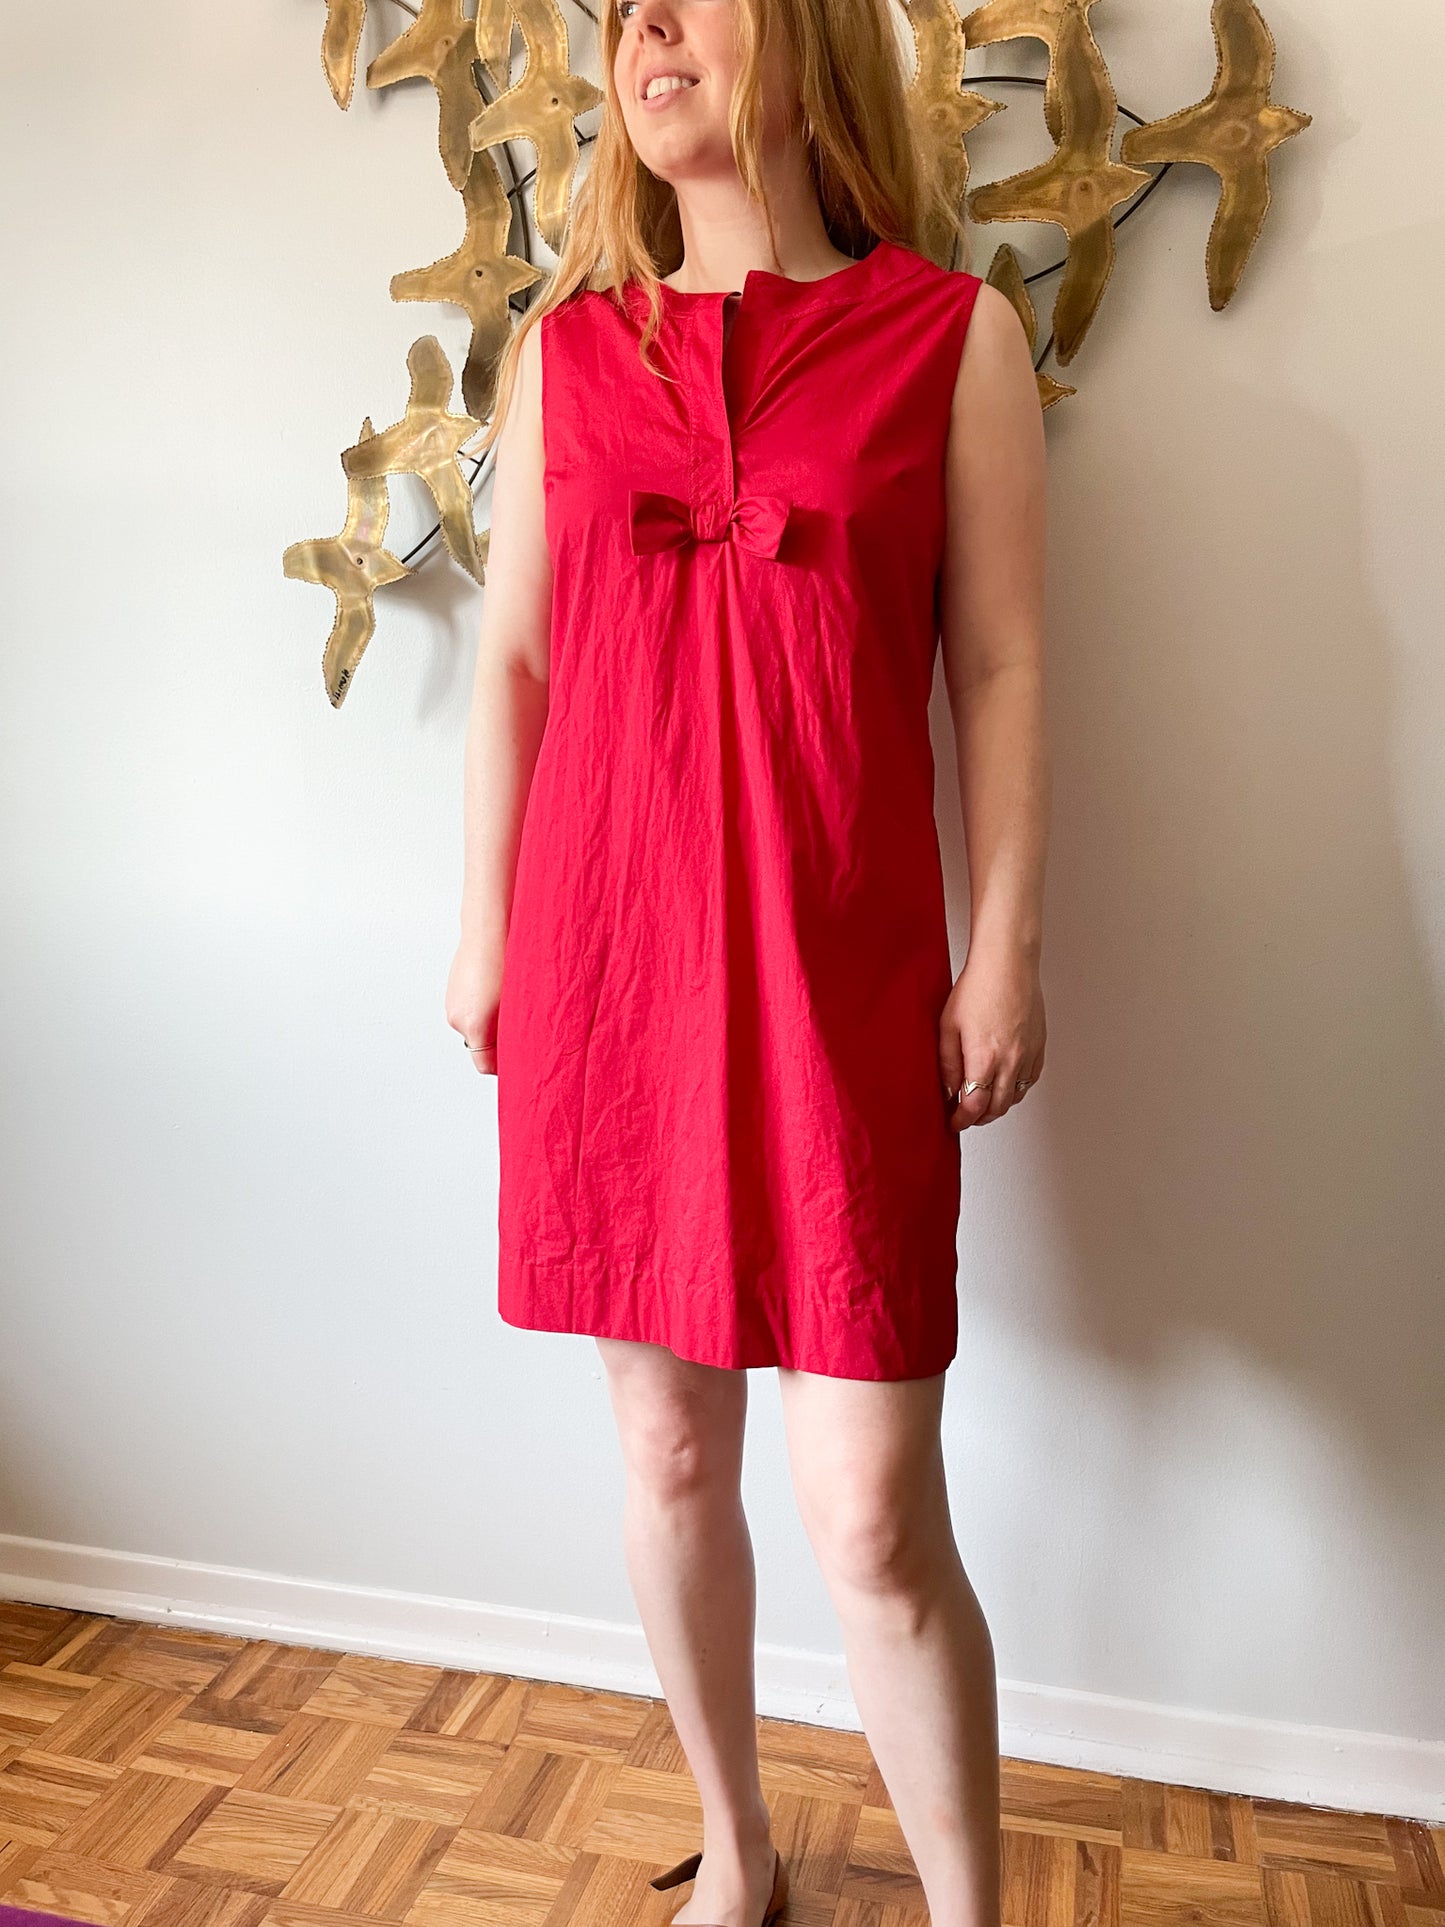 Talbots Red Cotton Bow Shift Dress - Size 10